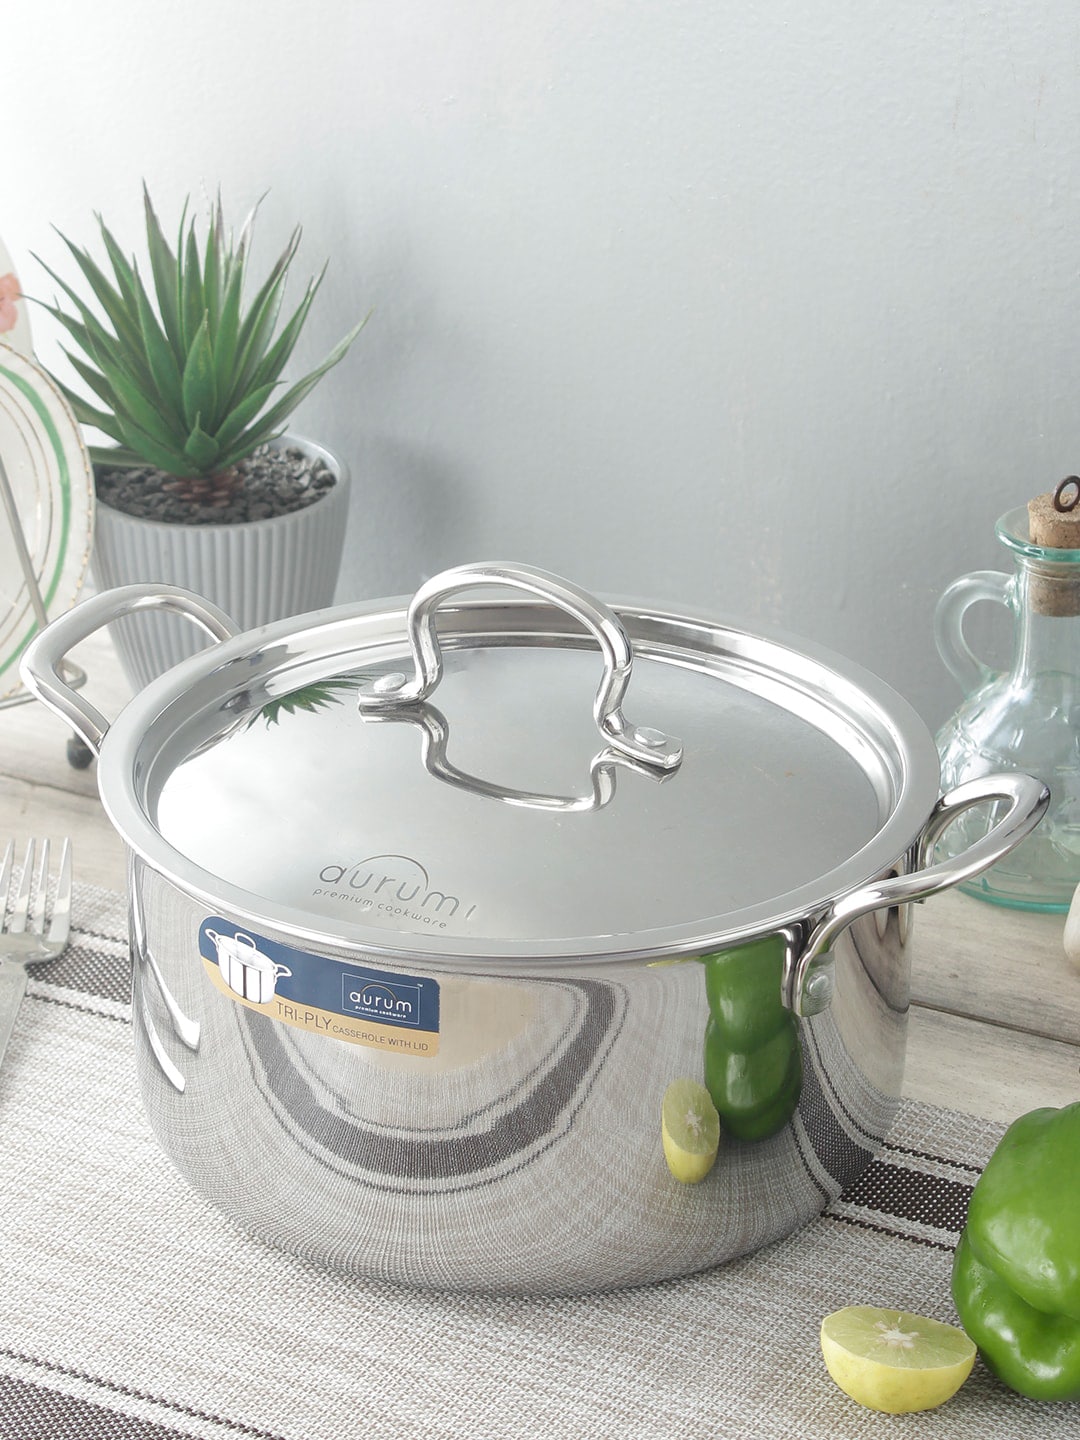 Aurum Triply Casserole With Stainless Steel Lid Price in India